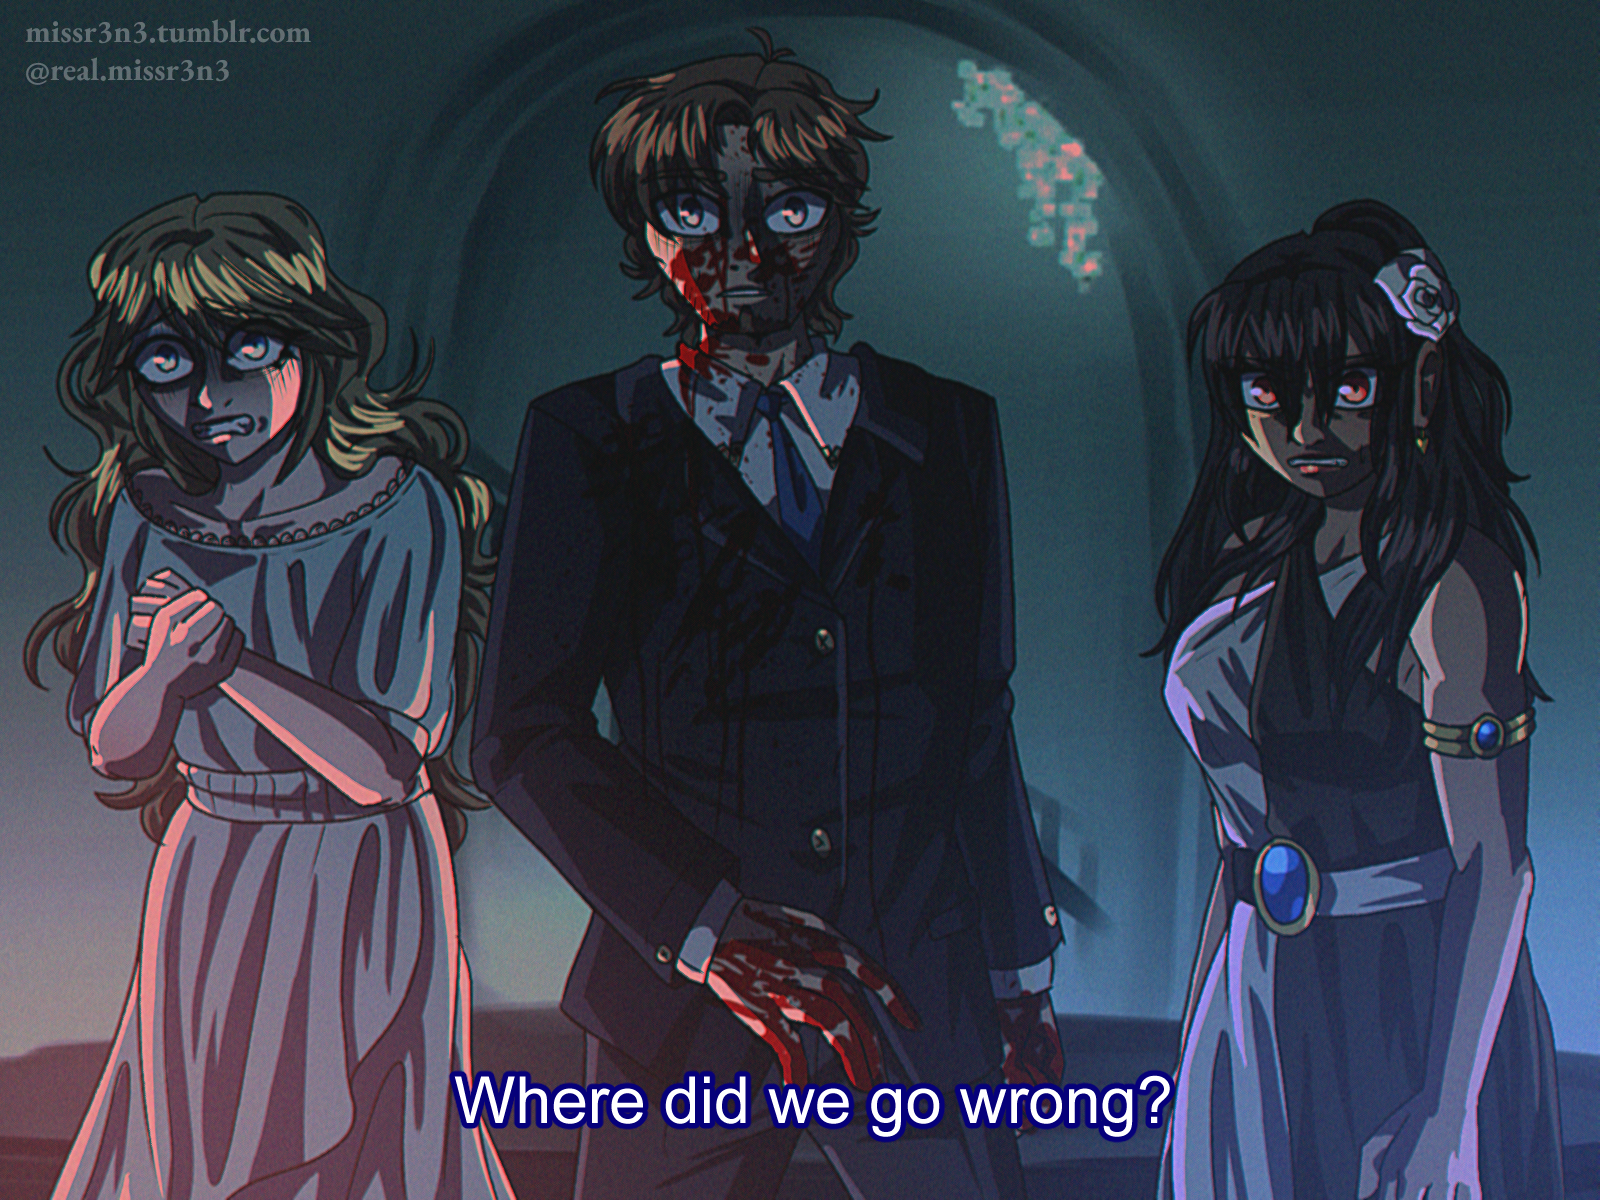 a fake anime screenshot of isabelle, norman, and officer wong from the cabin tales christmas special. norman is in the center, covered in blood and looking shocked. isabelle is on the left looking afraid, and wong is on the right looking angry. text in the style of fansubs reads 'where did we go wrong?'